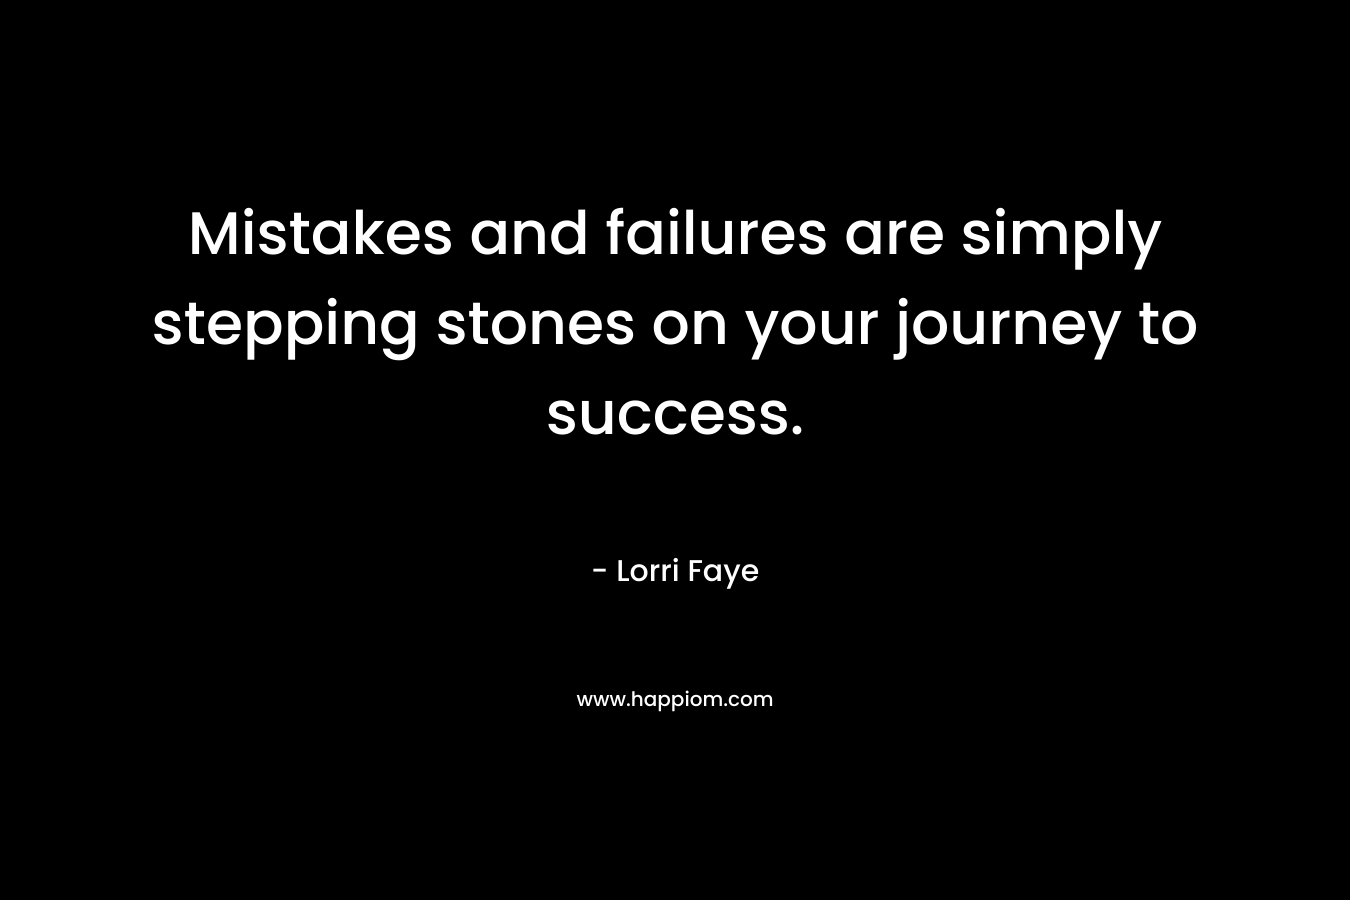 Mistakes and failures are simply stepping stones on your journey to success. – Lorri Faye